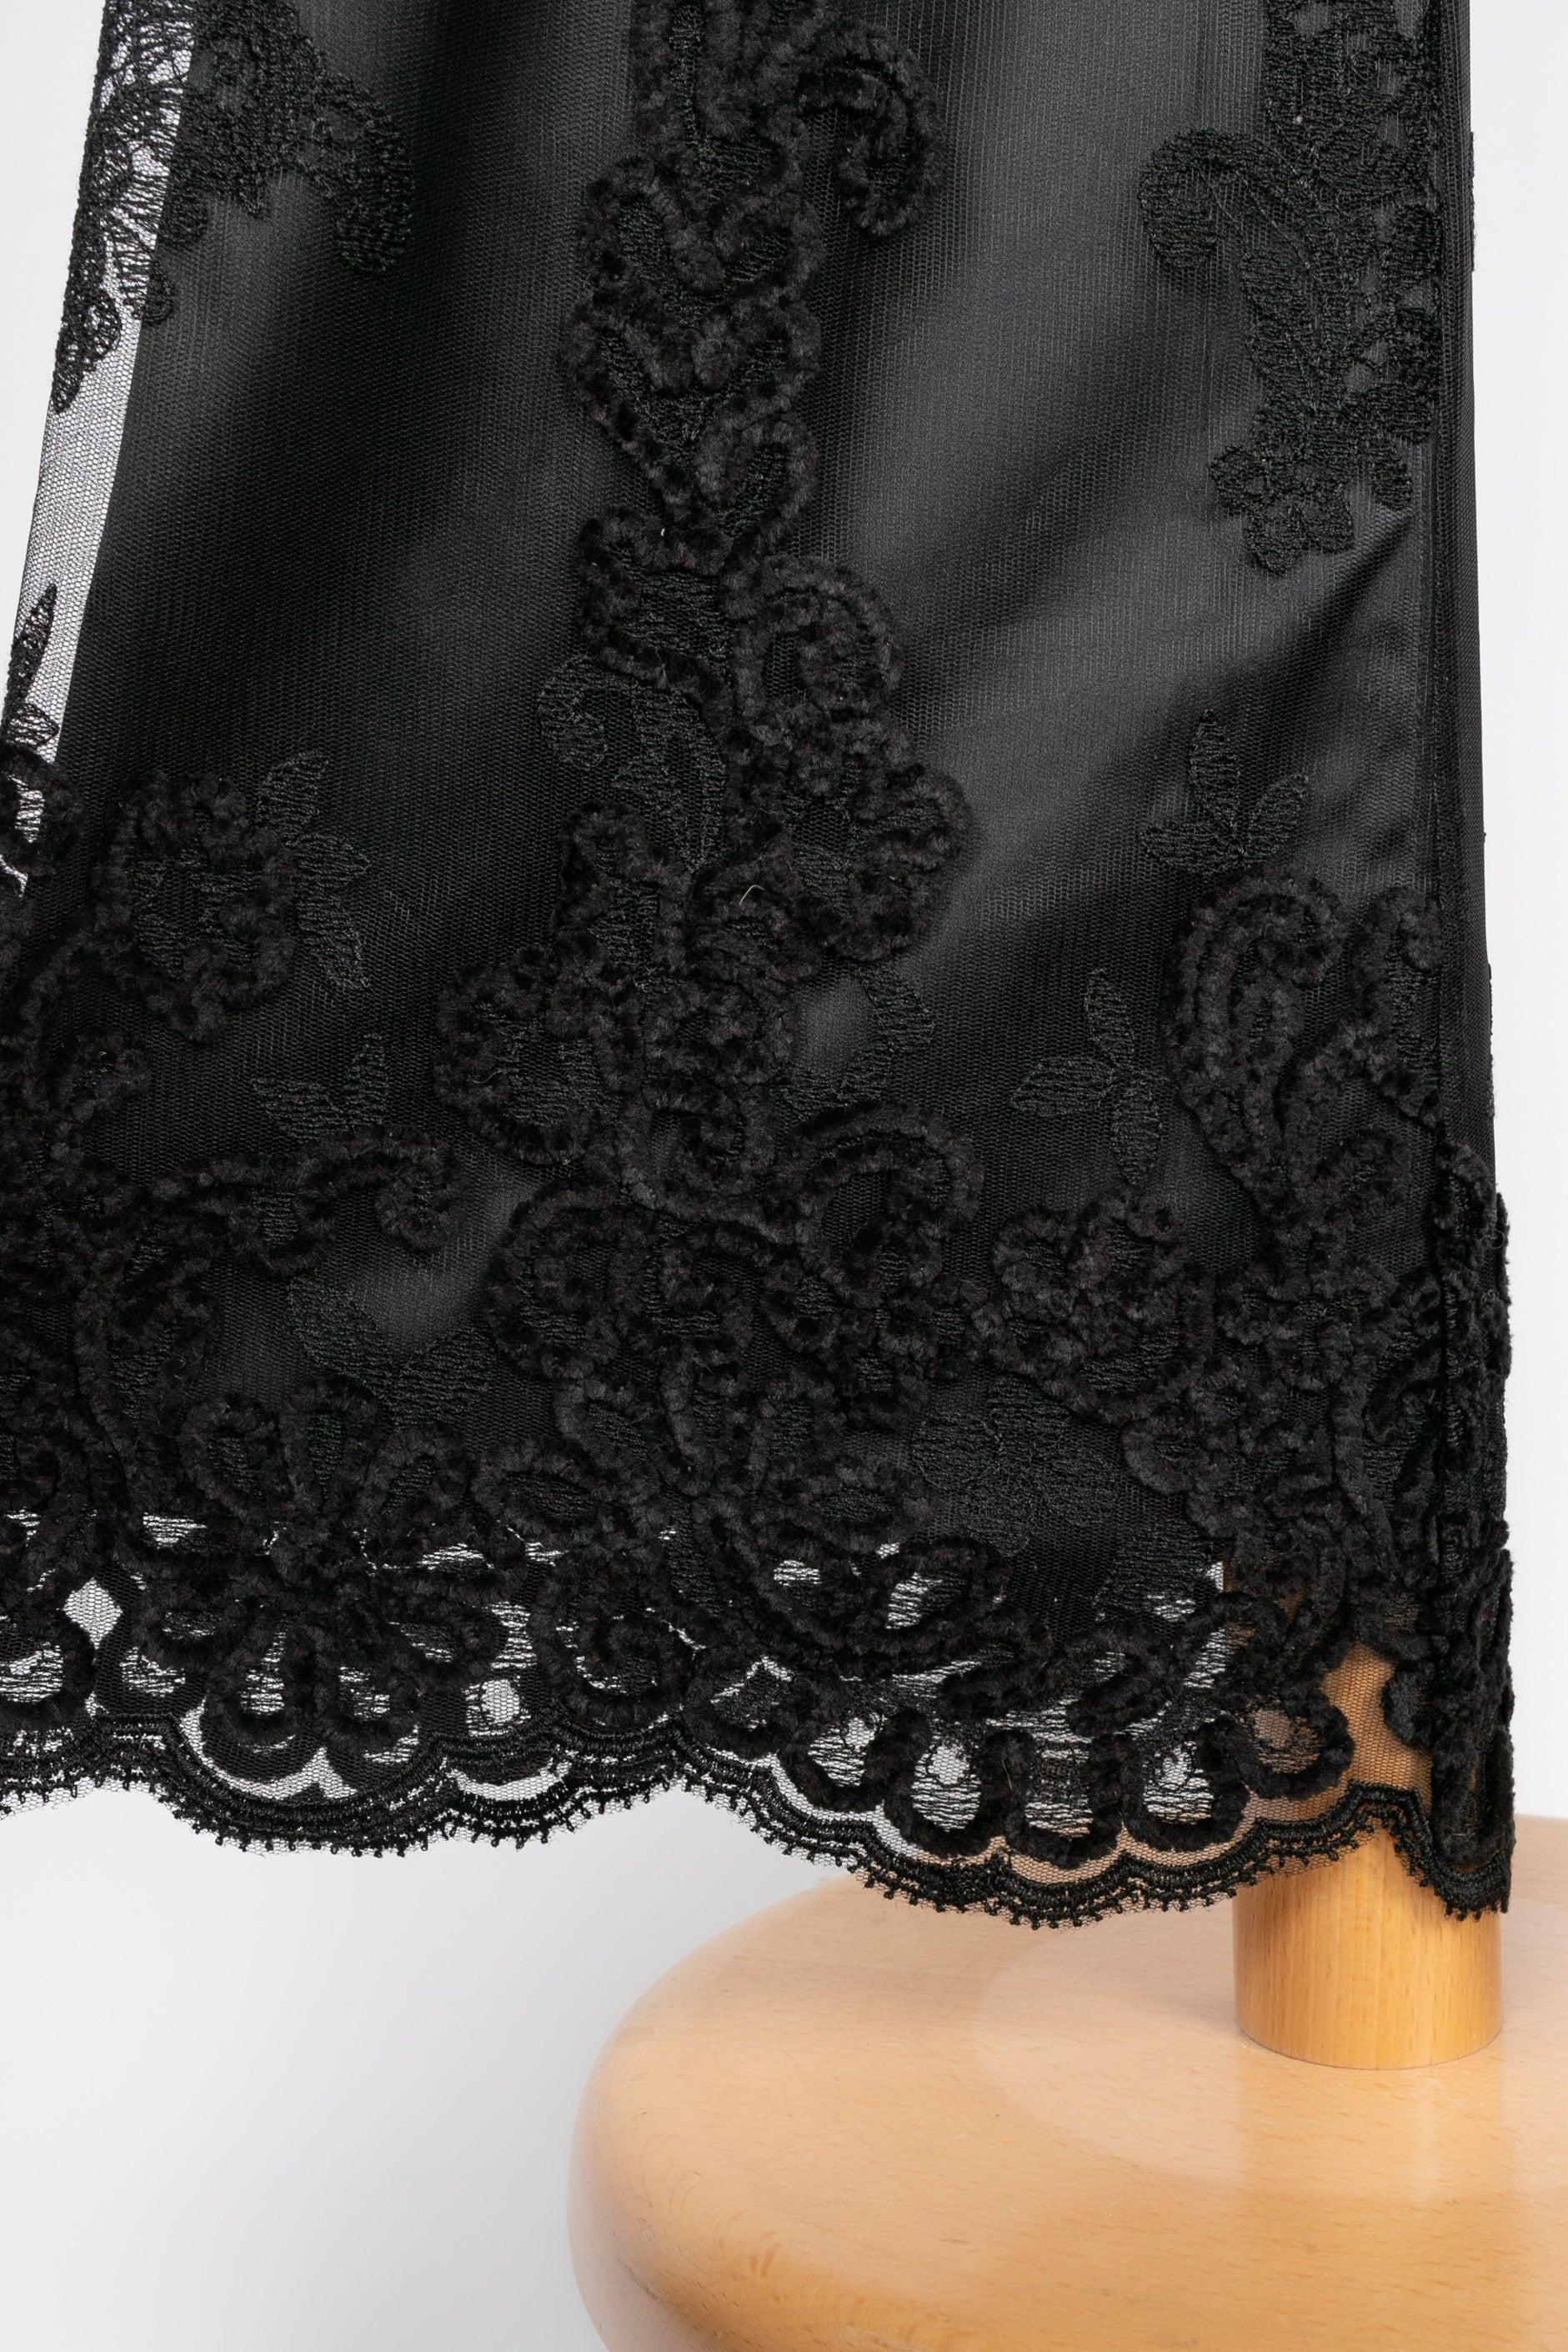 La Perla Black Satin Pants Enlivened with a Tulle Embroidered with Patterns For Sale 1